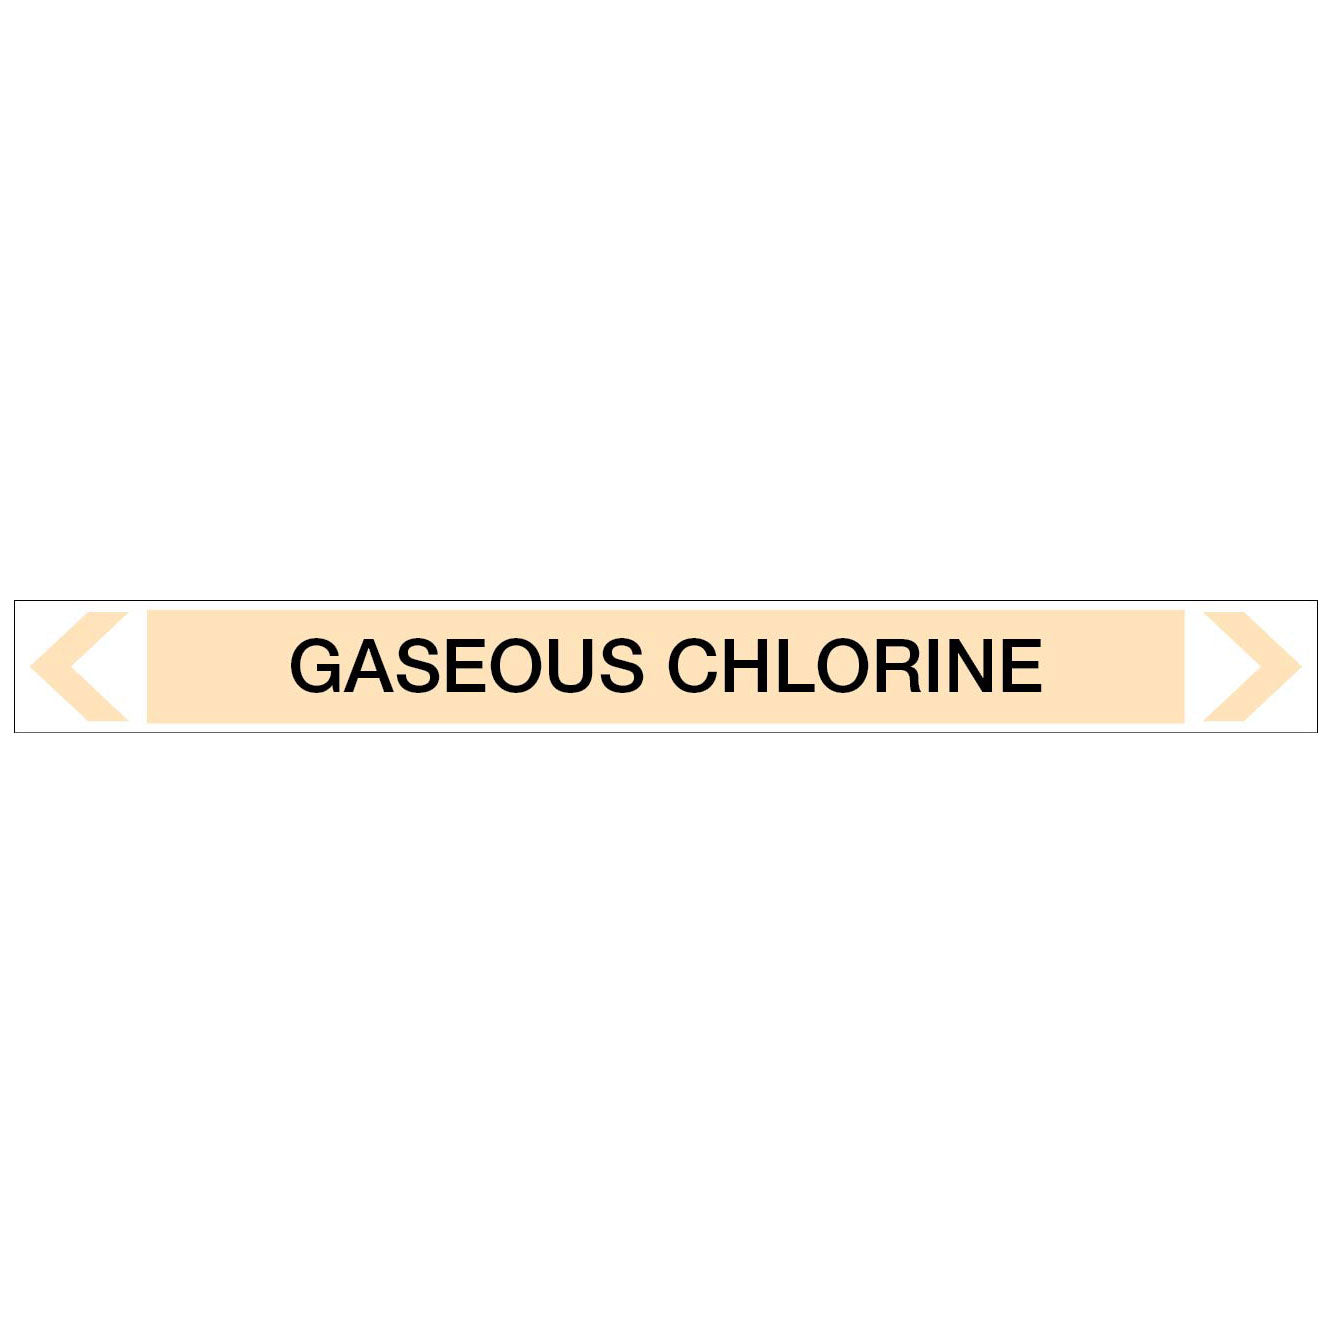 Gases - Gaseous Chlorine - Pipe Marker Sticker